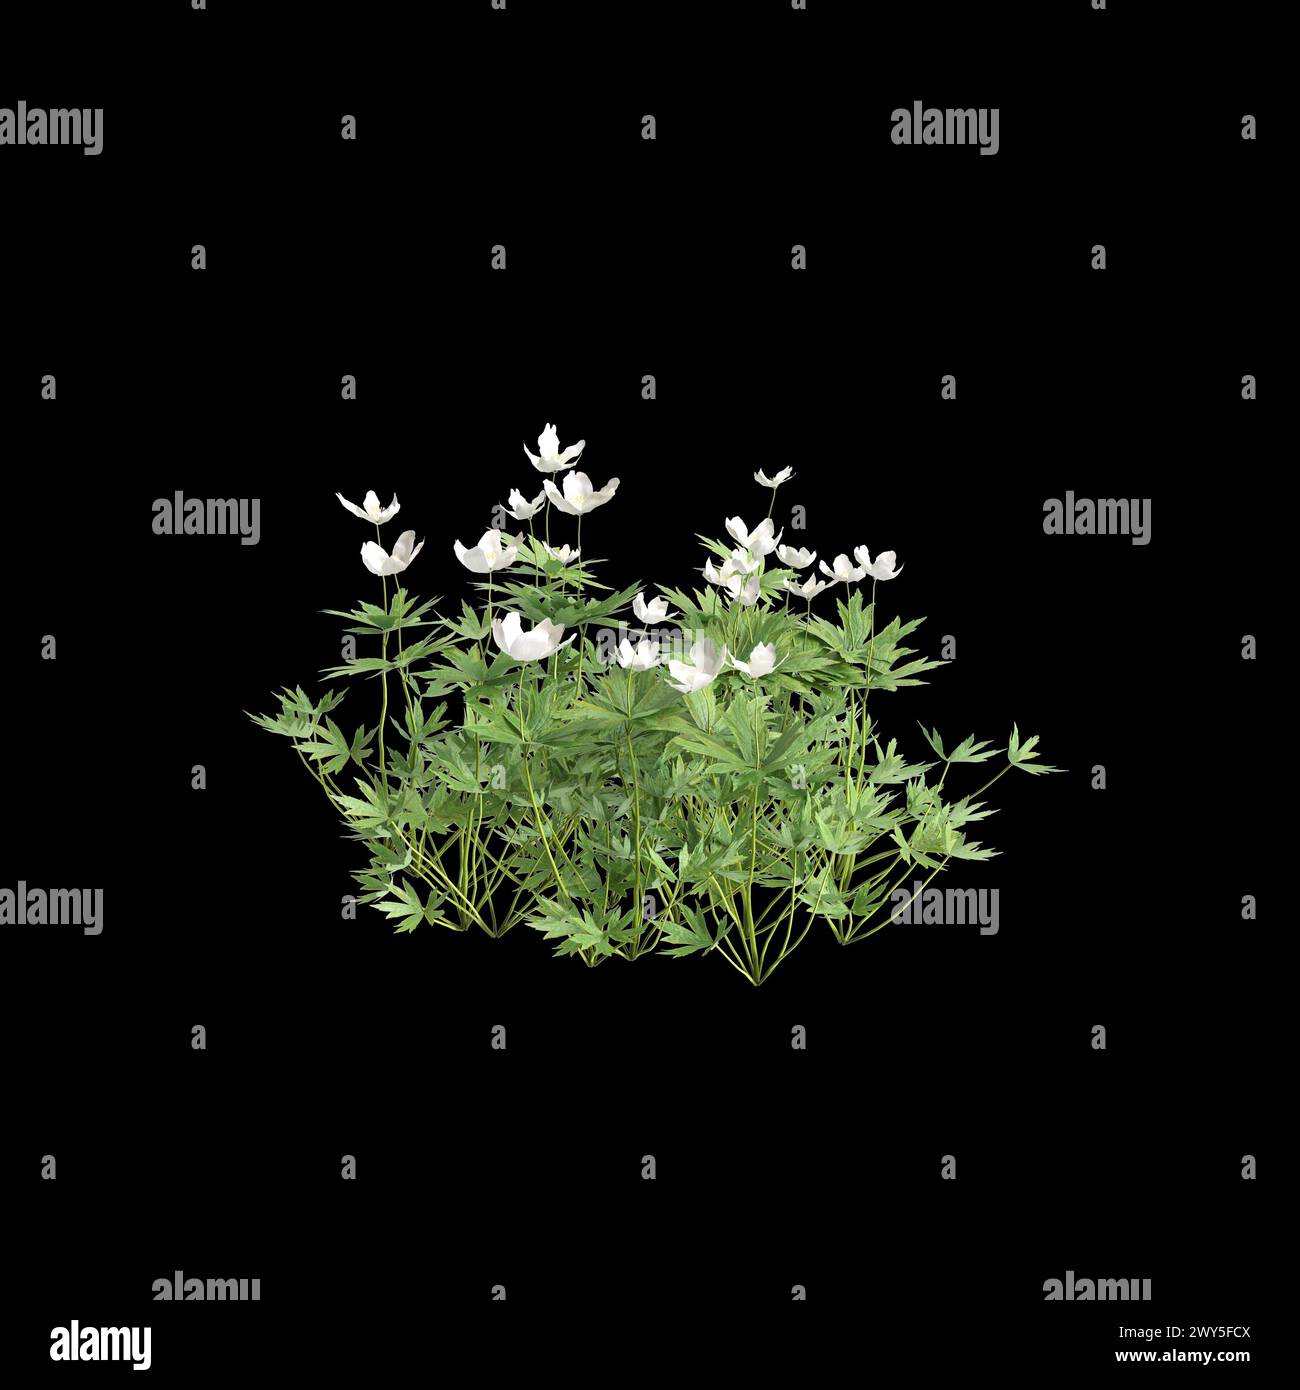 3d illustration of Anemone canadensis bush isolated on black background Stock Photo